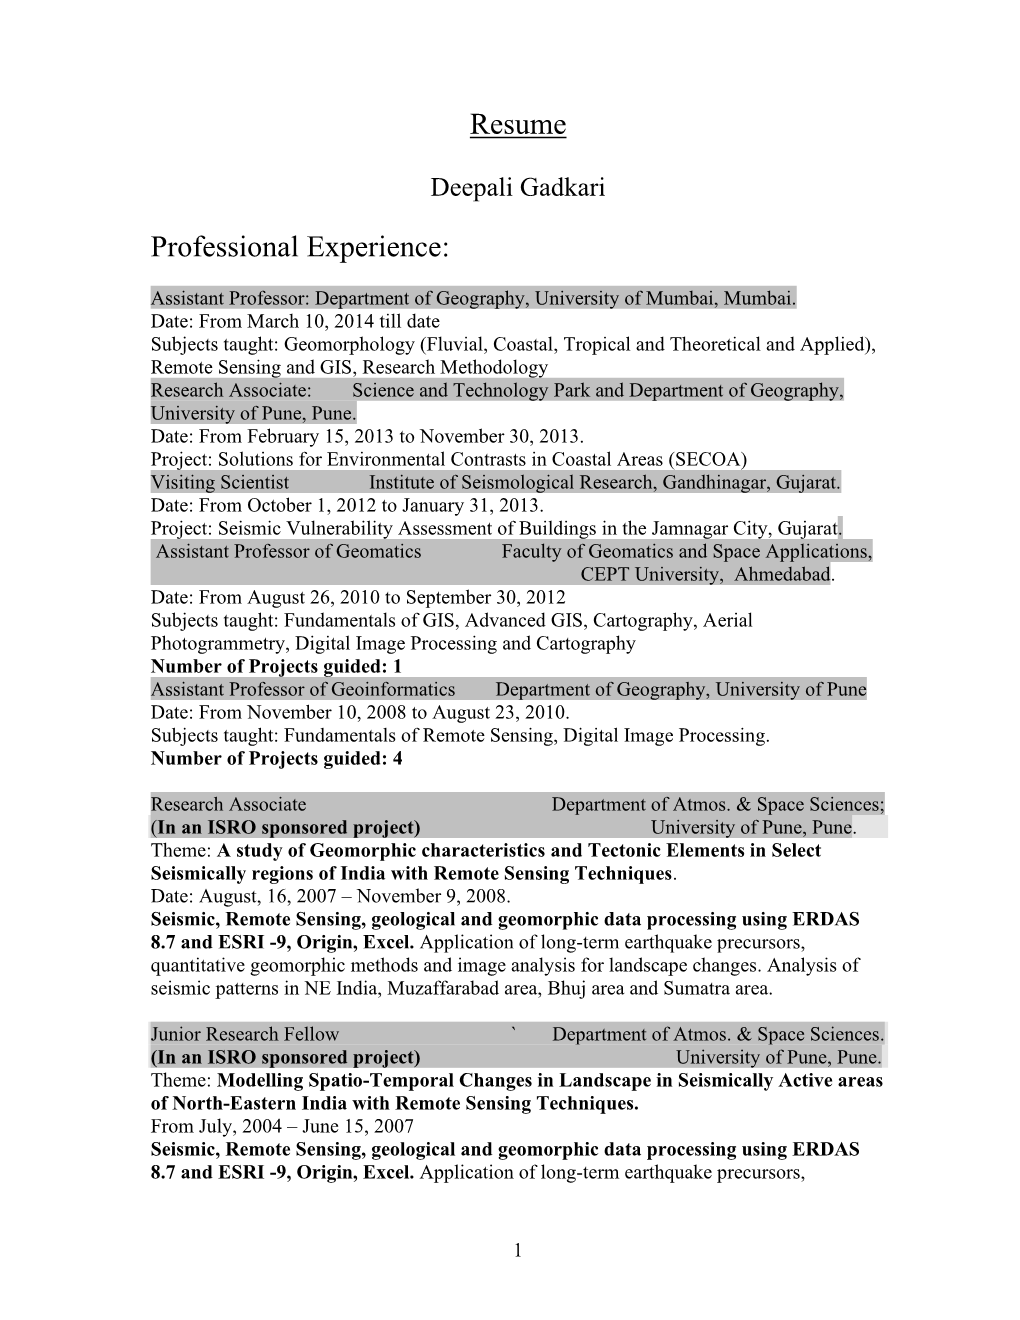 Resume Professional Experience